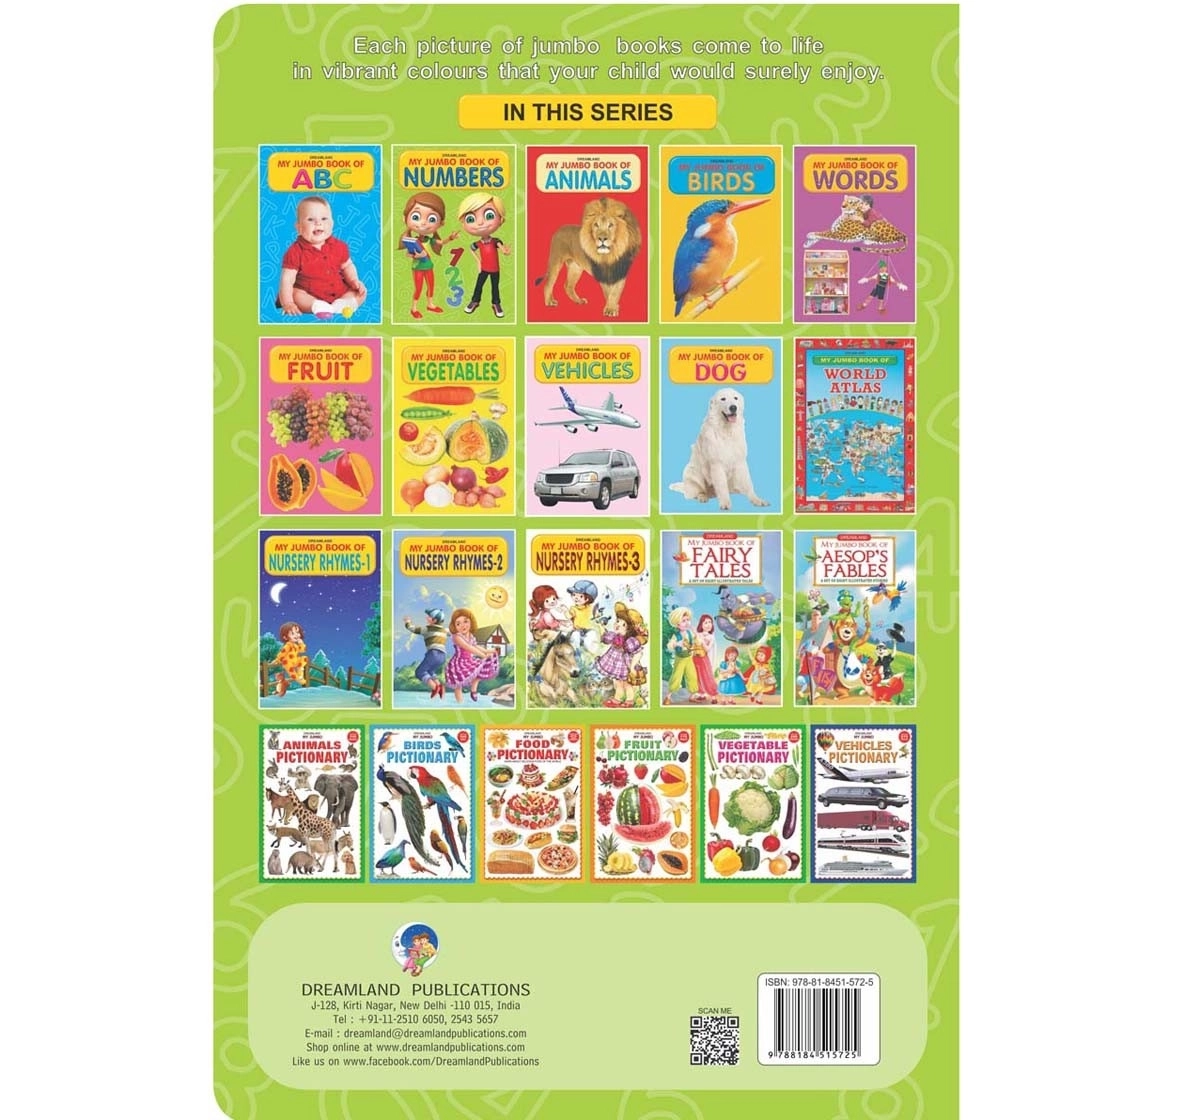 Dreamland Paperback My Jumbo Number Books for Kids 3Y+, Multicolour